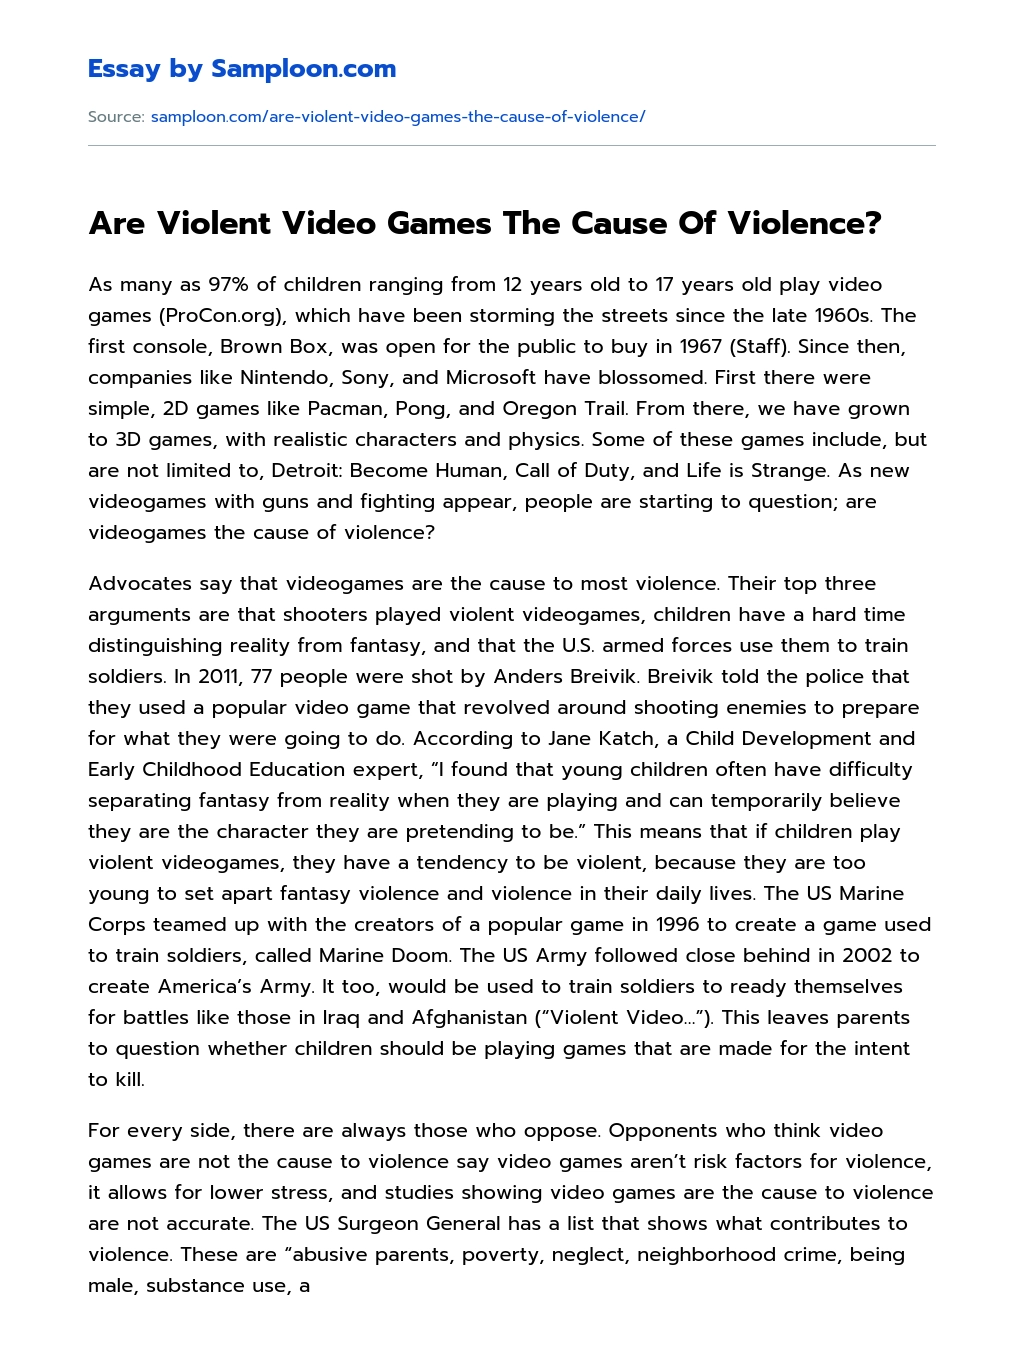 Are Violent Video Games The Cause Of Violence? essay